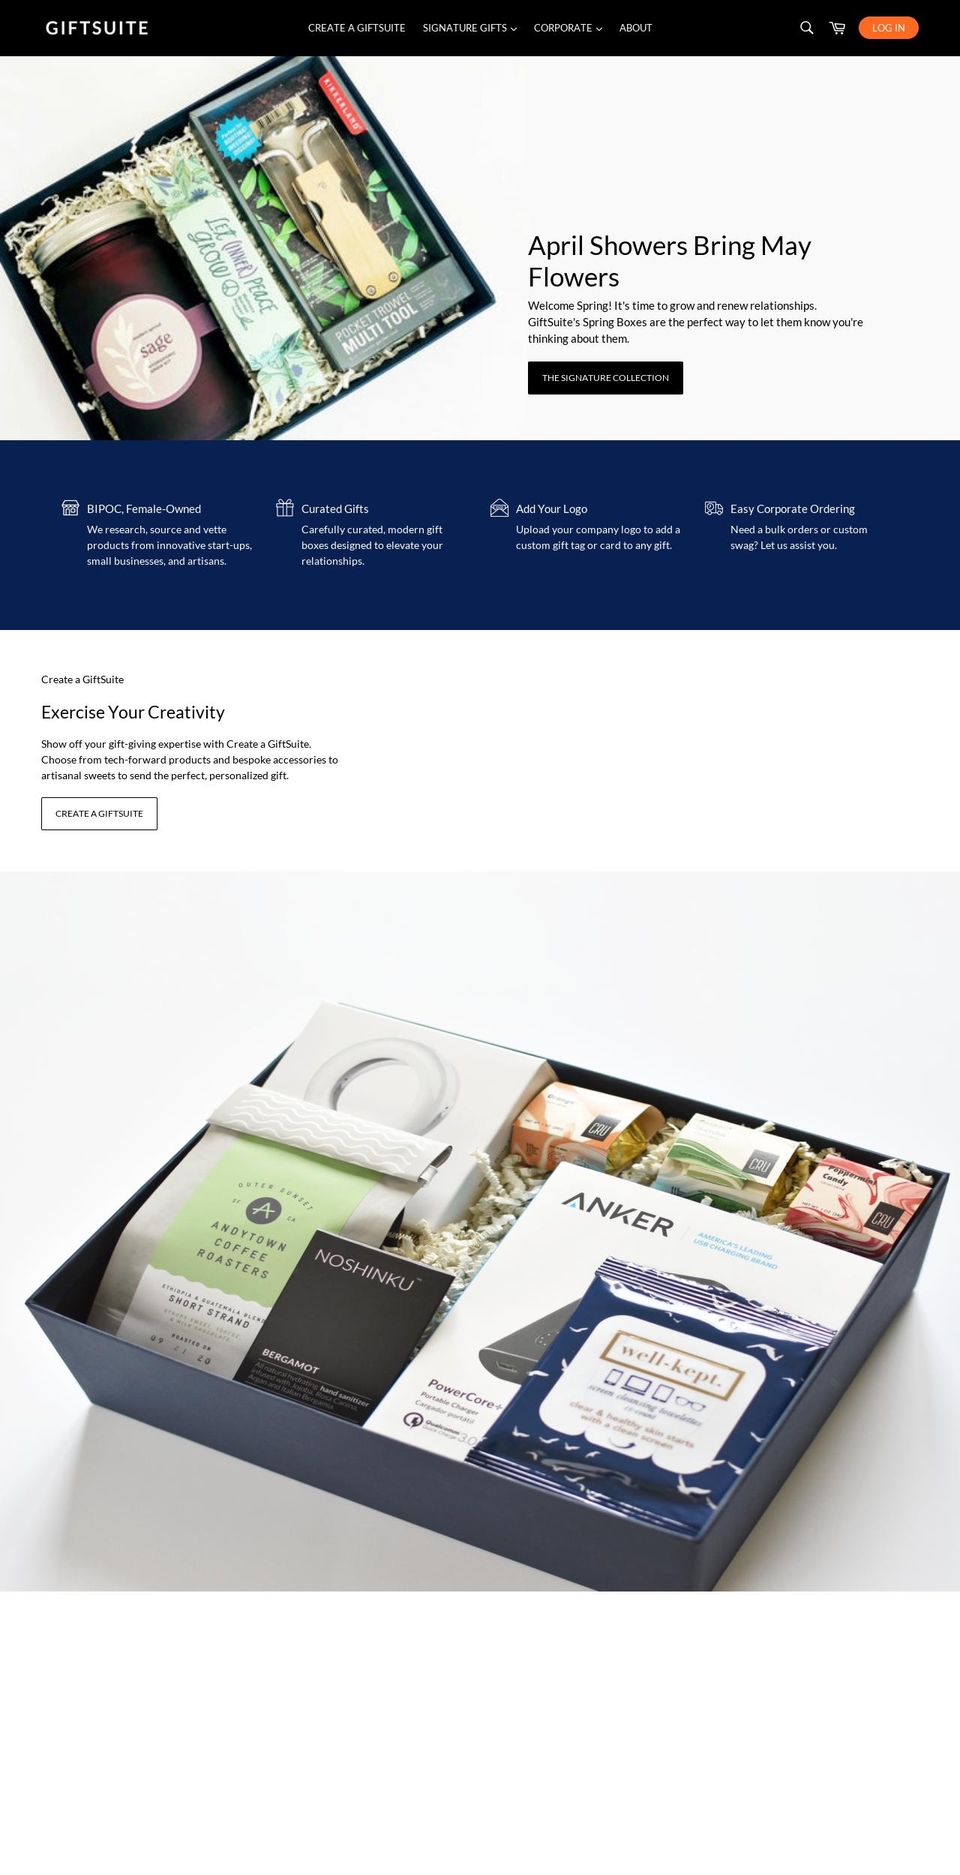 Gifts Shopify theme site example giftsuite.com